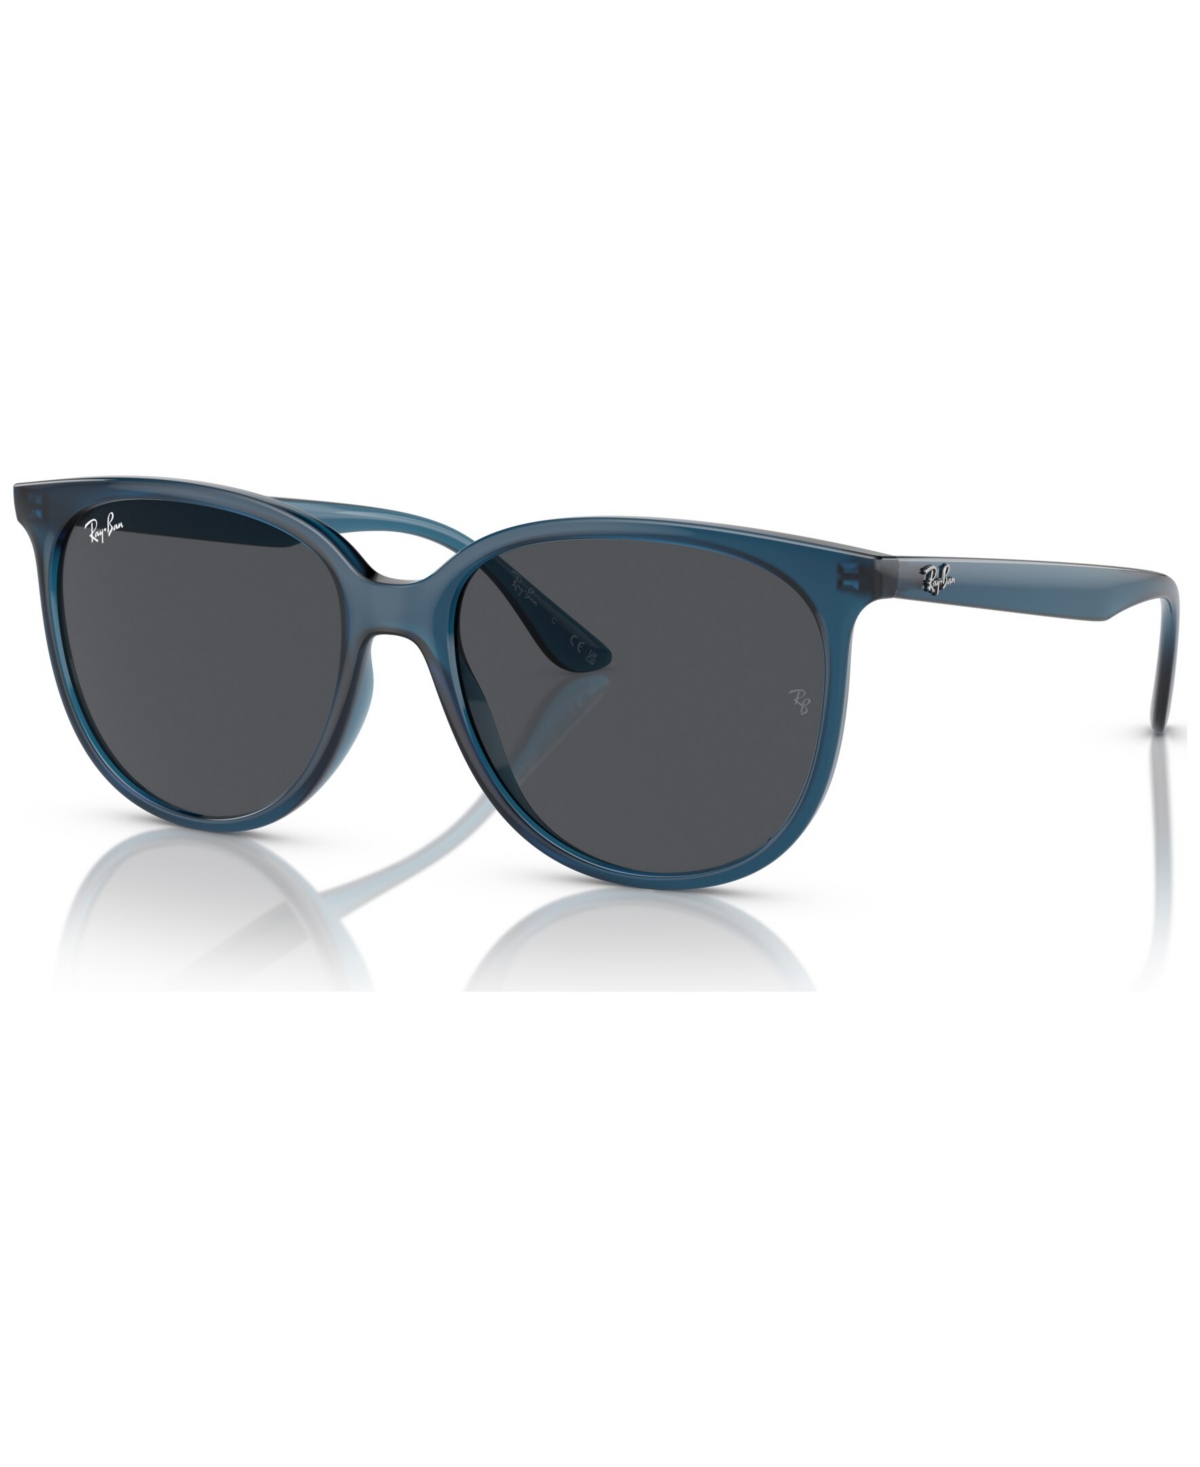 Ray Ban Ray-ban Low Bridge Fit Square Sunglasses, 54mm In Blue/gray Solid